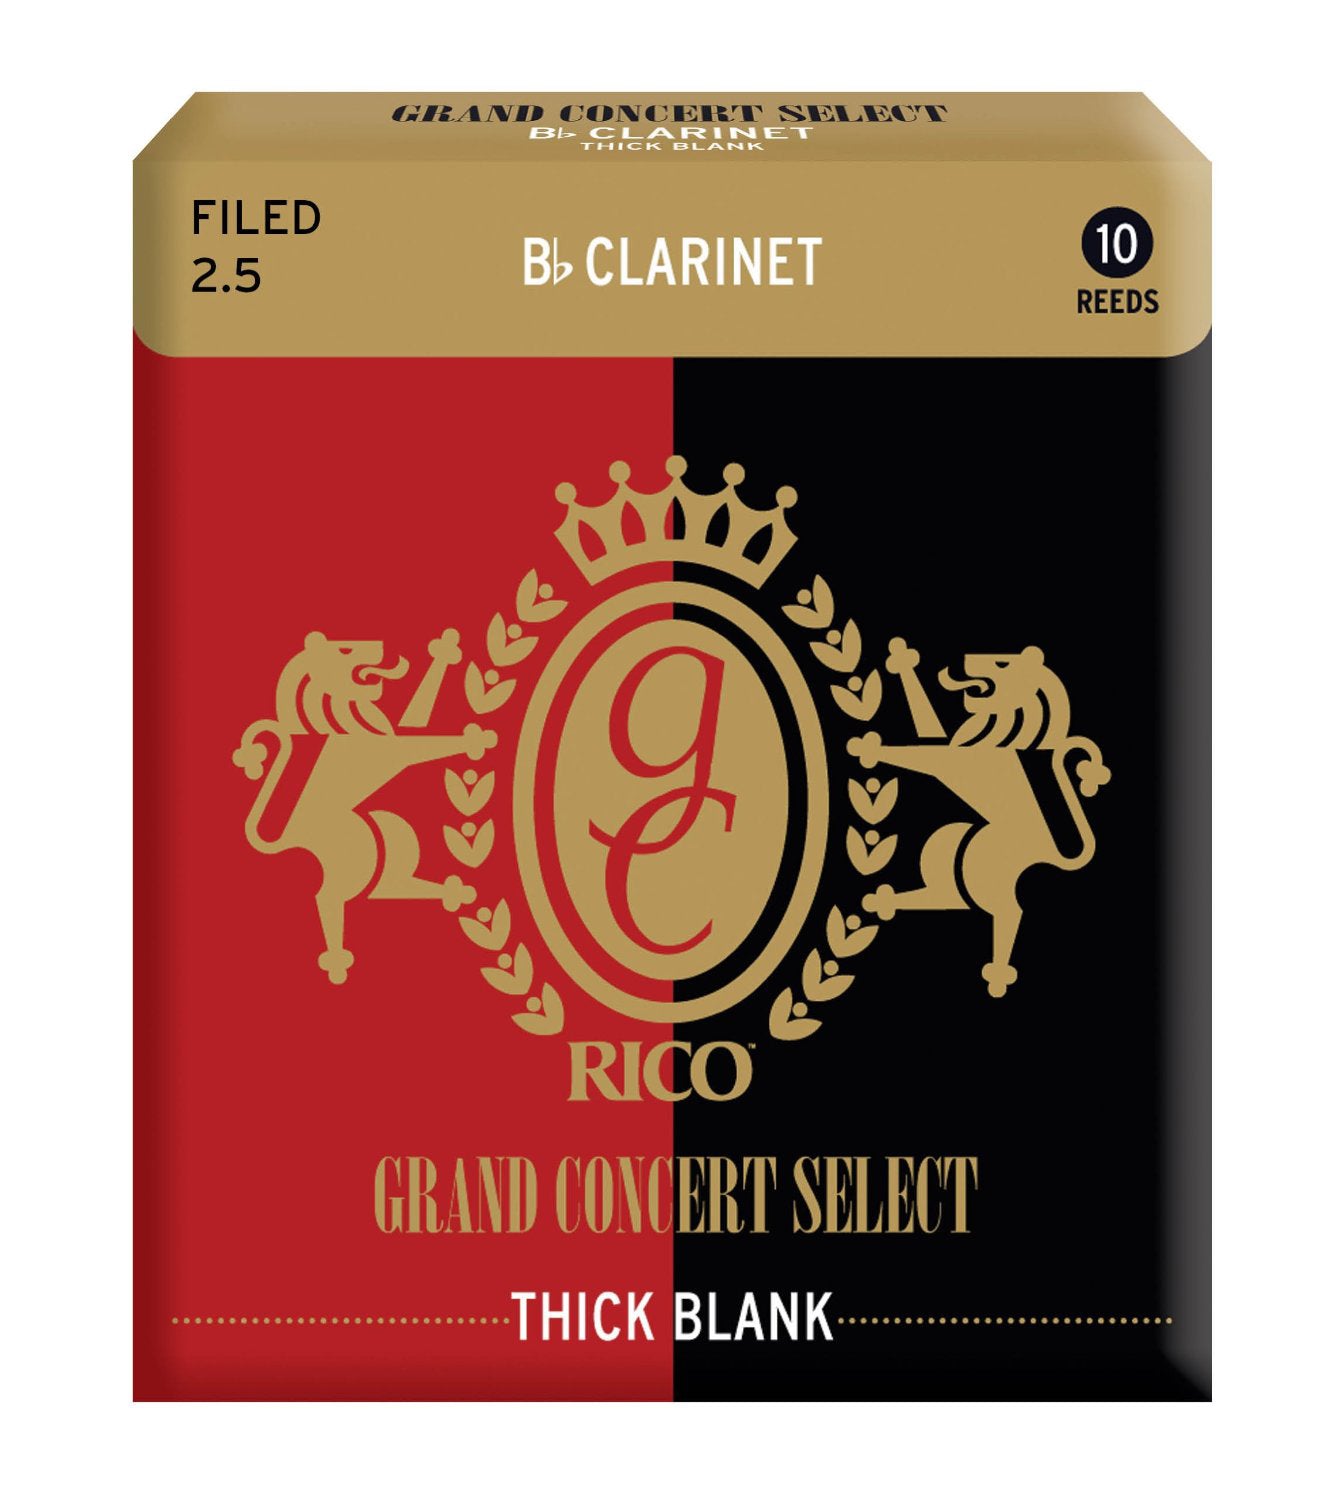 Rico Grand Concert Select Thick Blank Bb Clarinet Reeds, 10Ct, 2.5 Strength